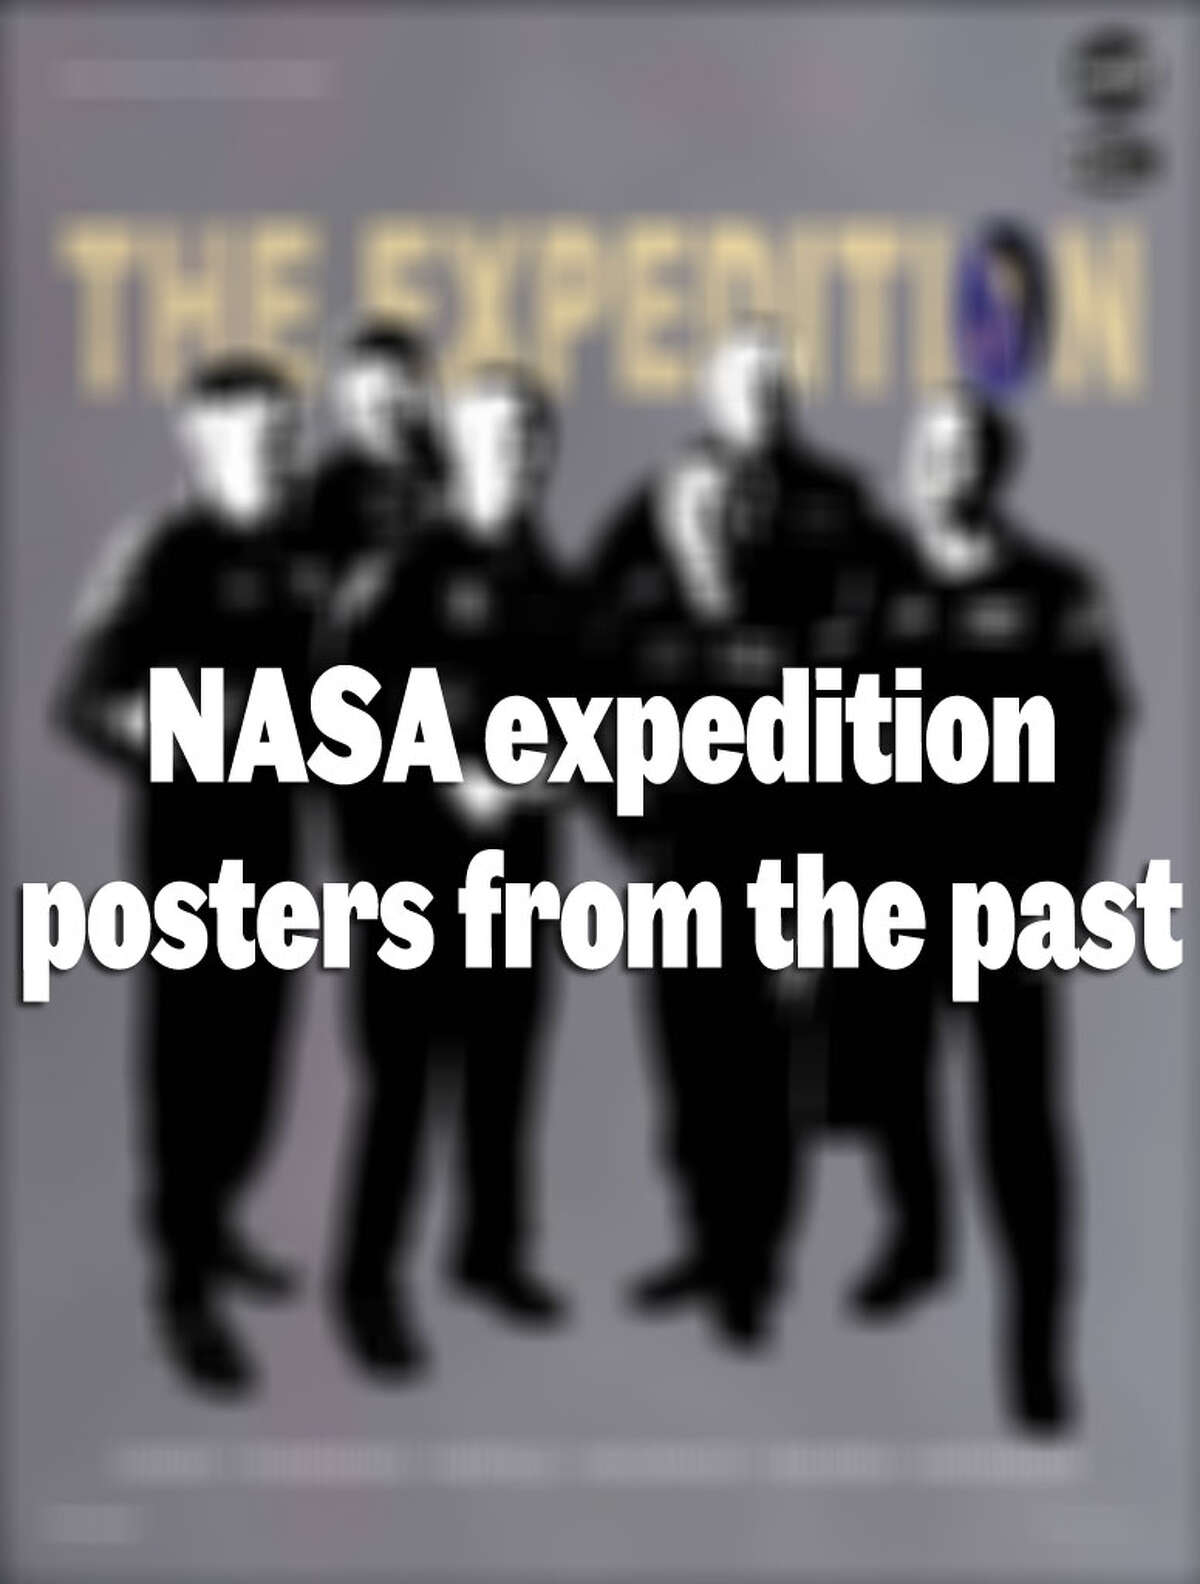 PHOTOS: NASA expedition posters from the past